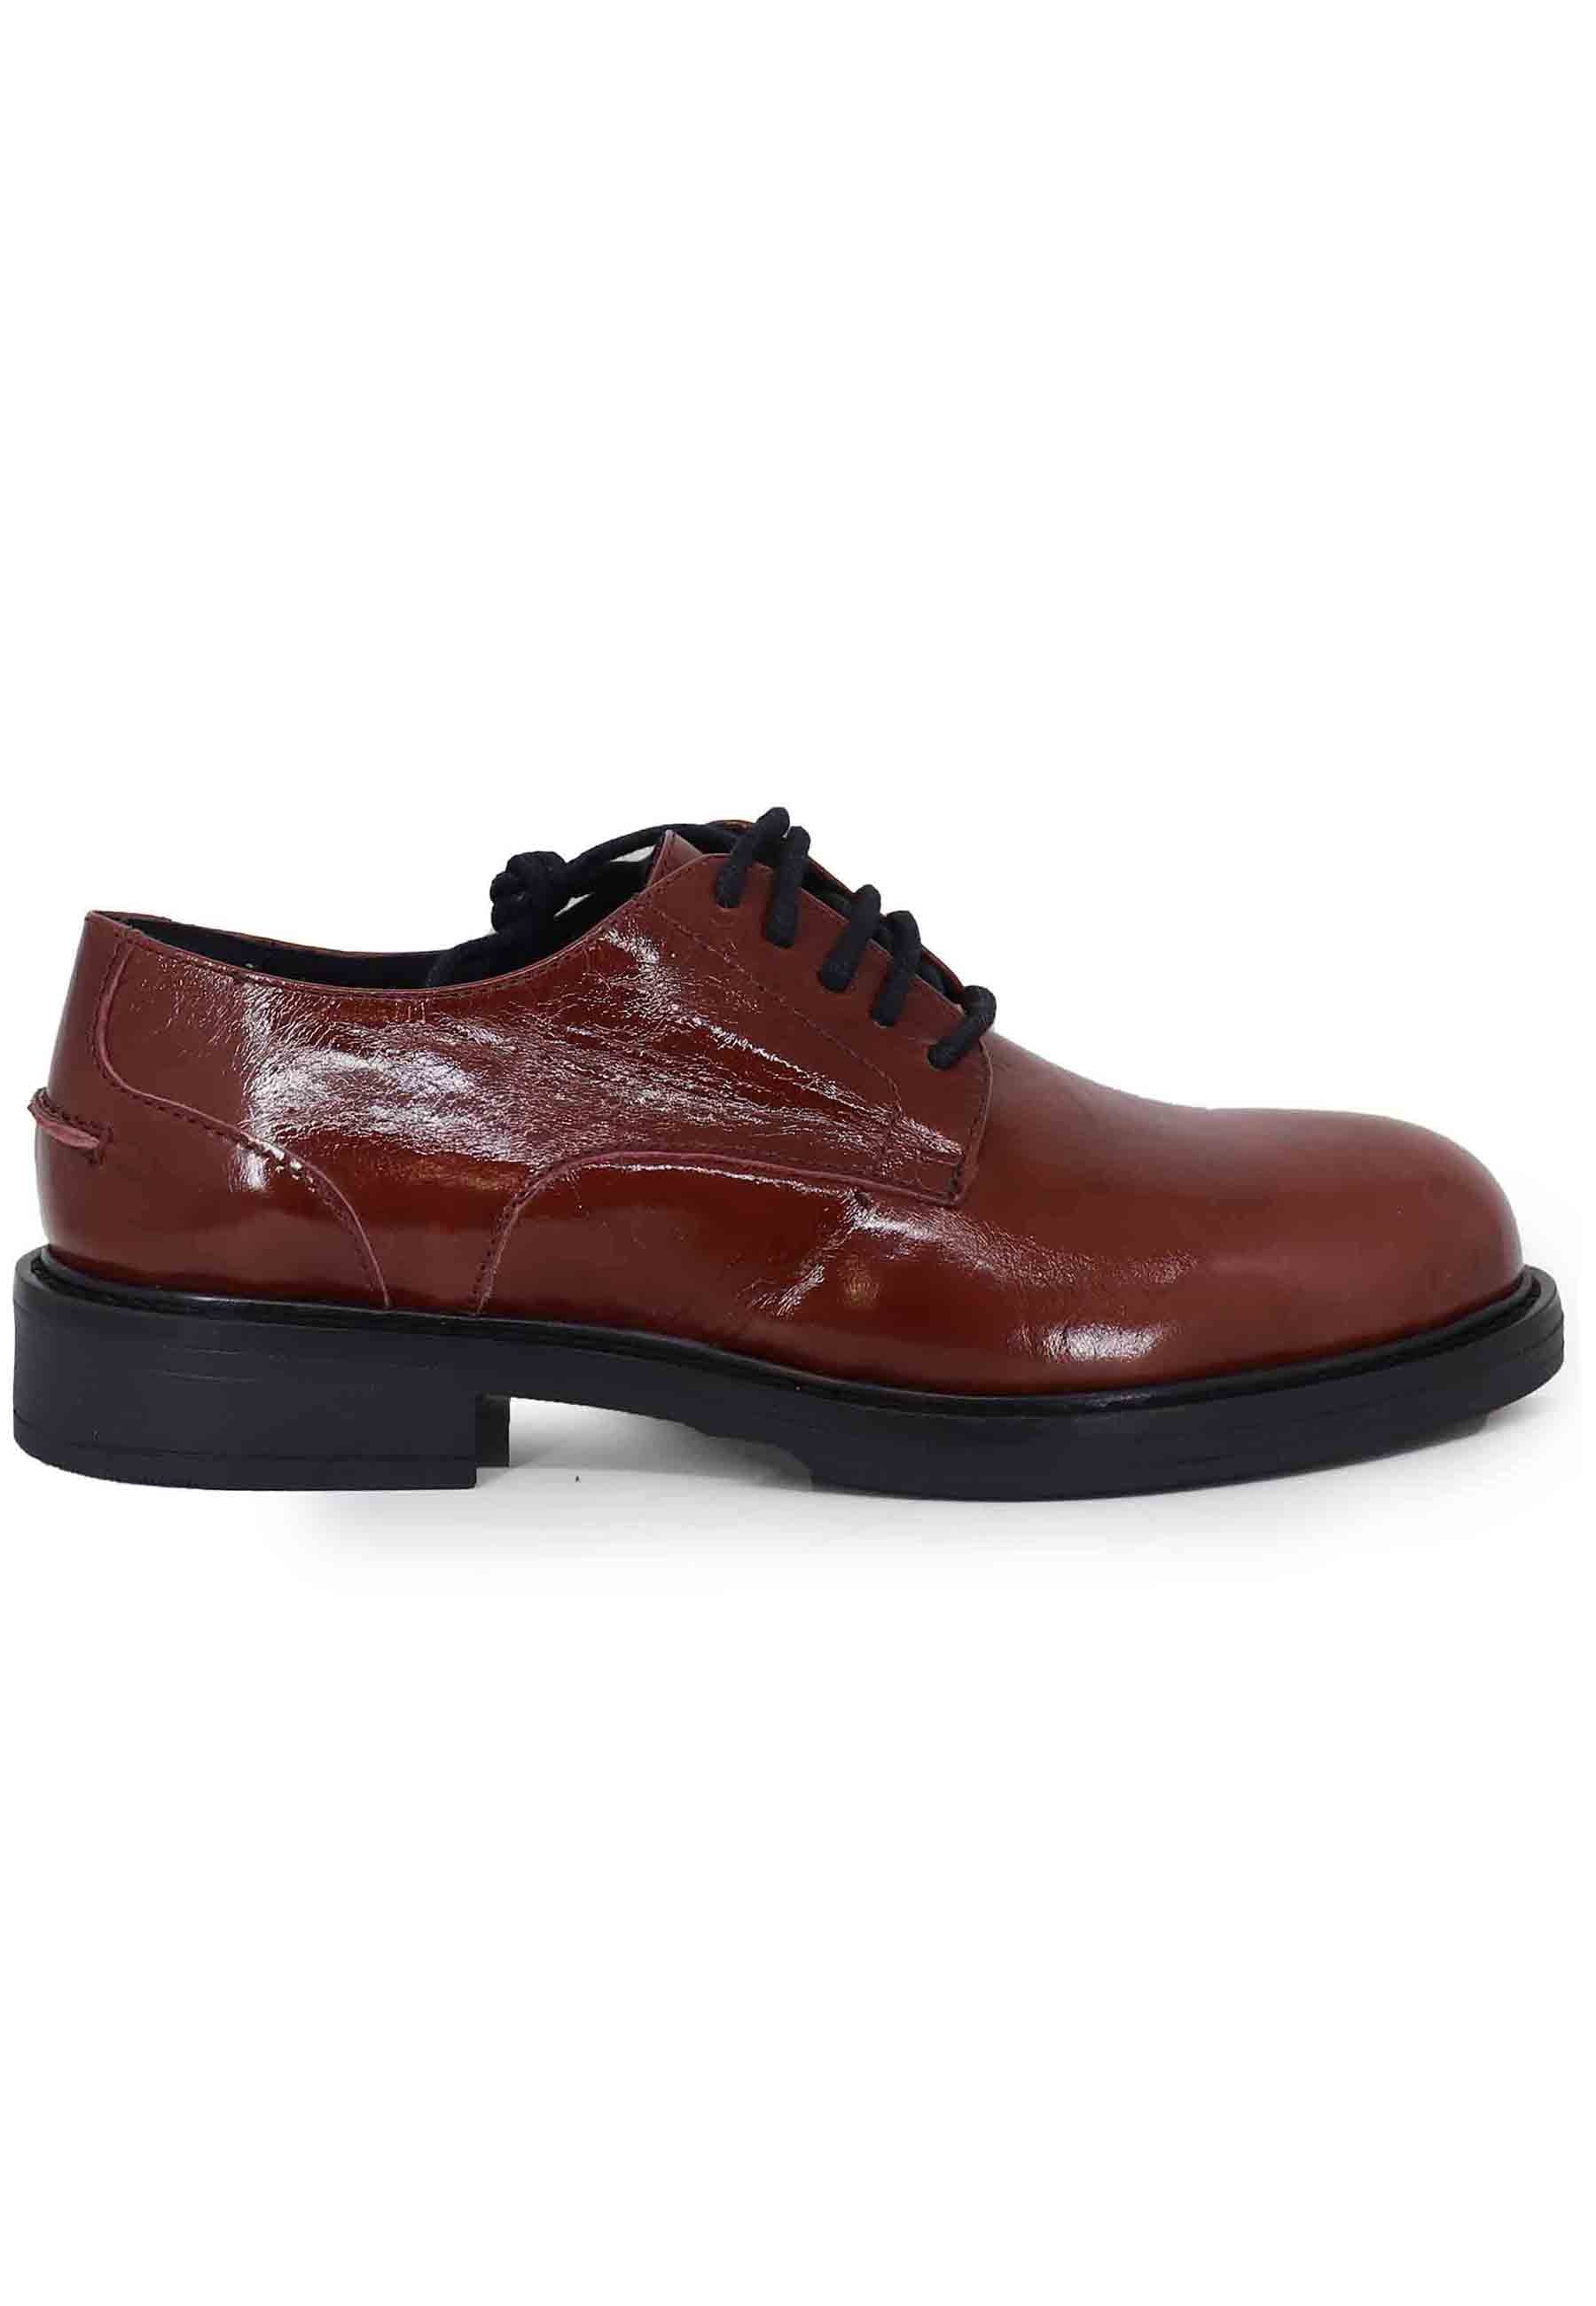 Women's lace-ups in burgundy naplack leather with rubber sole and low heel